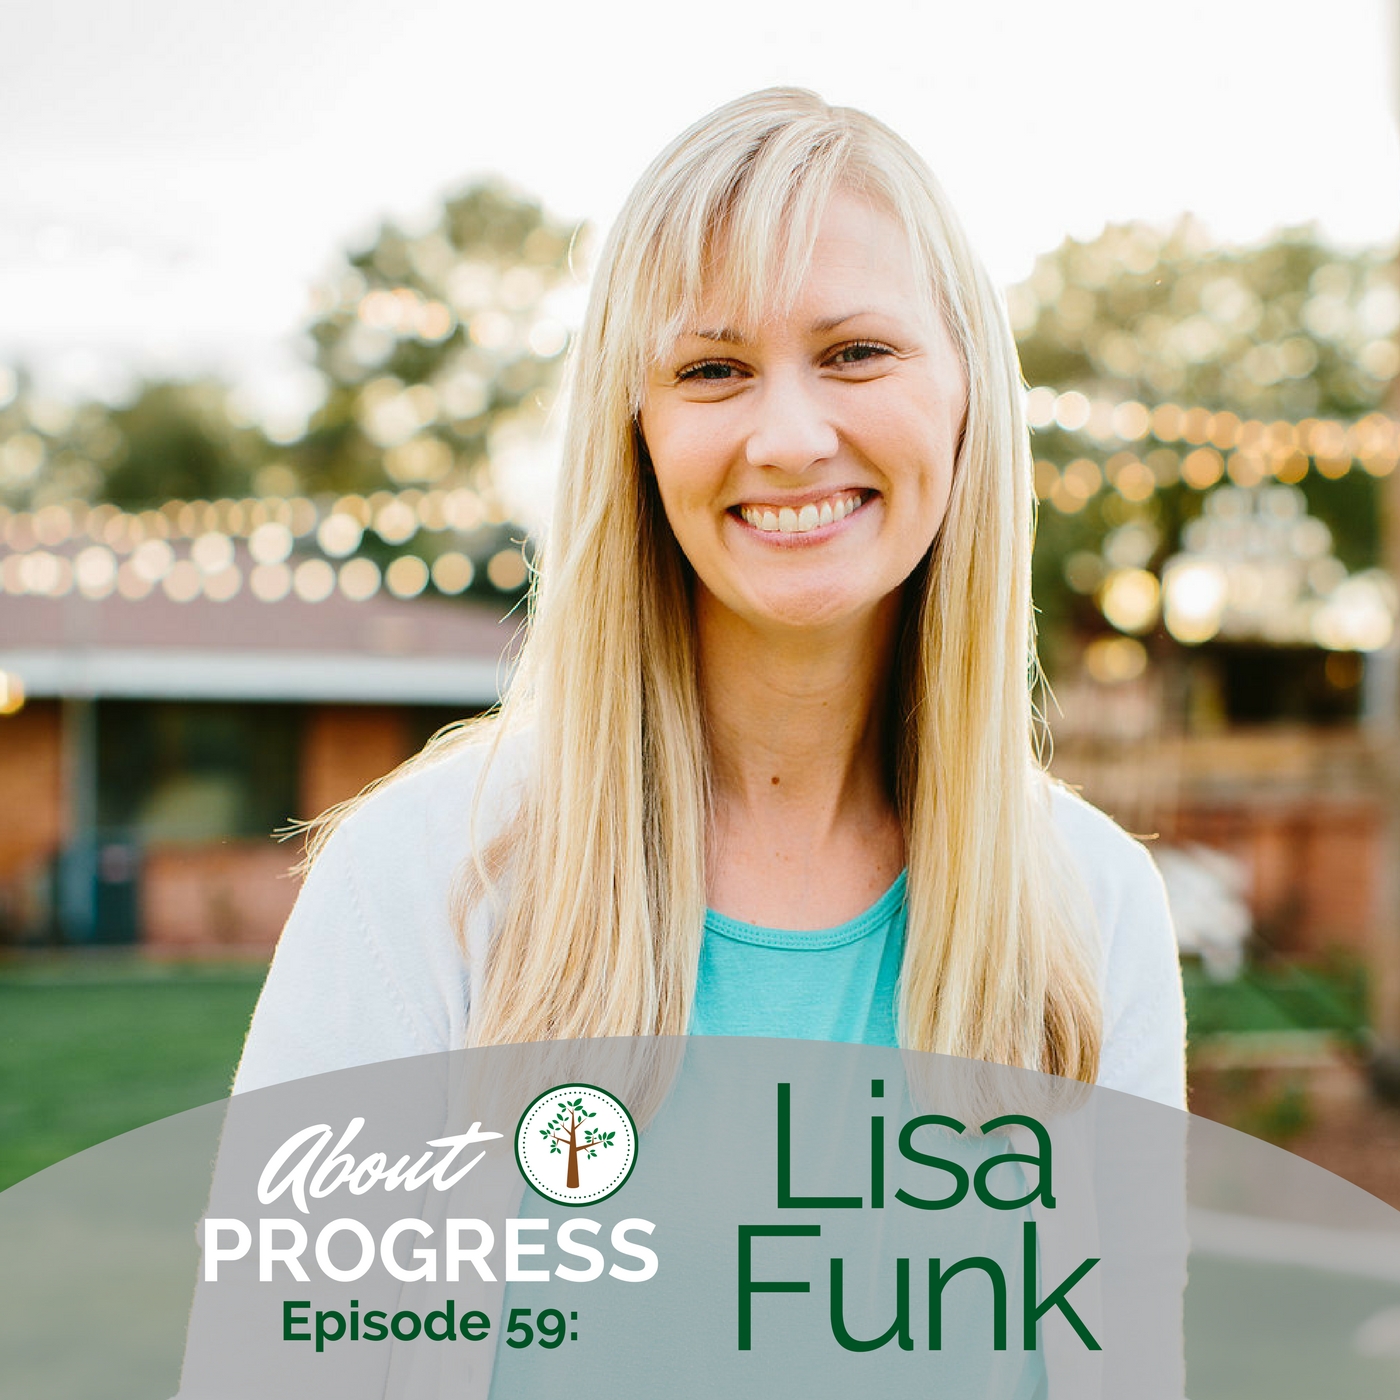 Lisa Funk: Developing Our Creativity, and Using it as a Tool to Fight  Depression